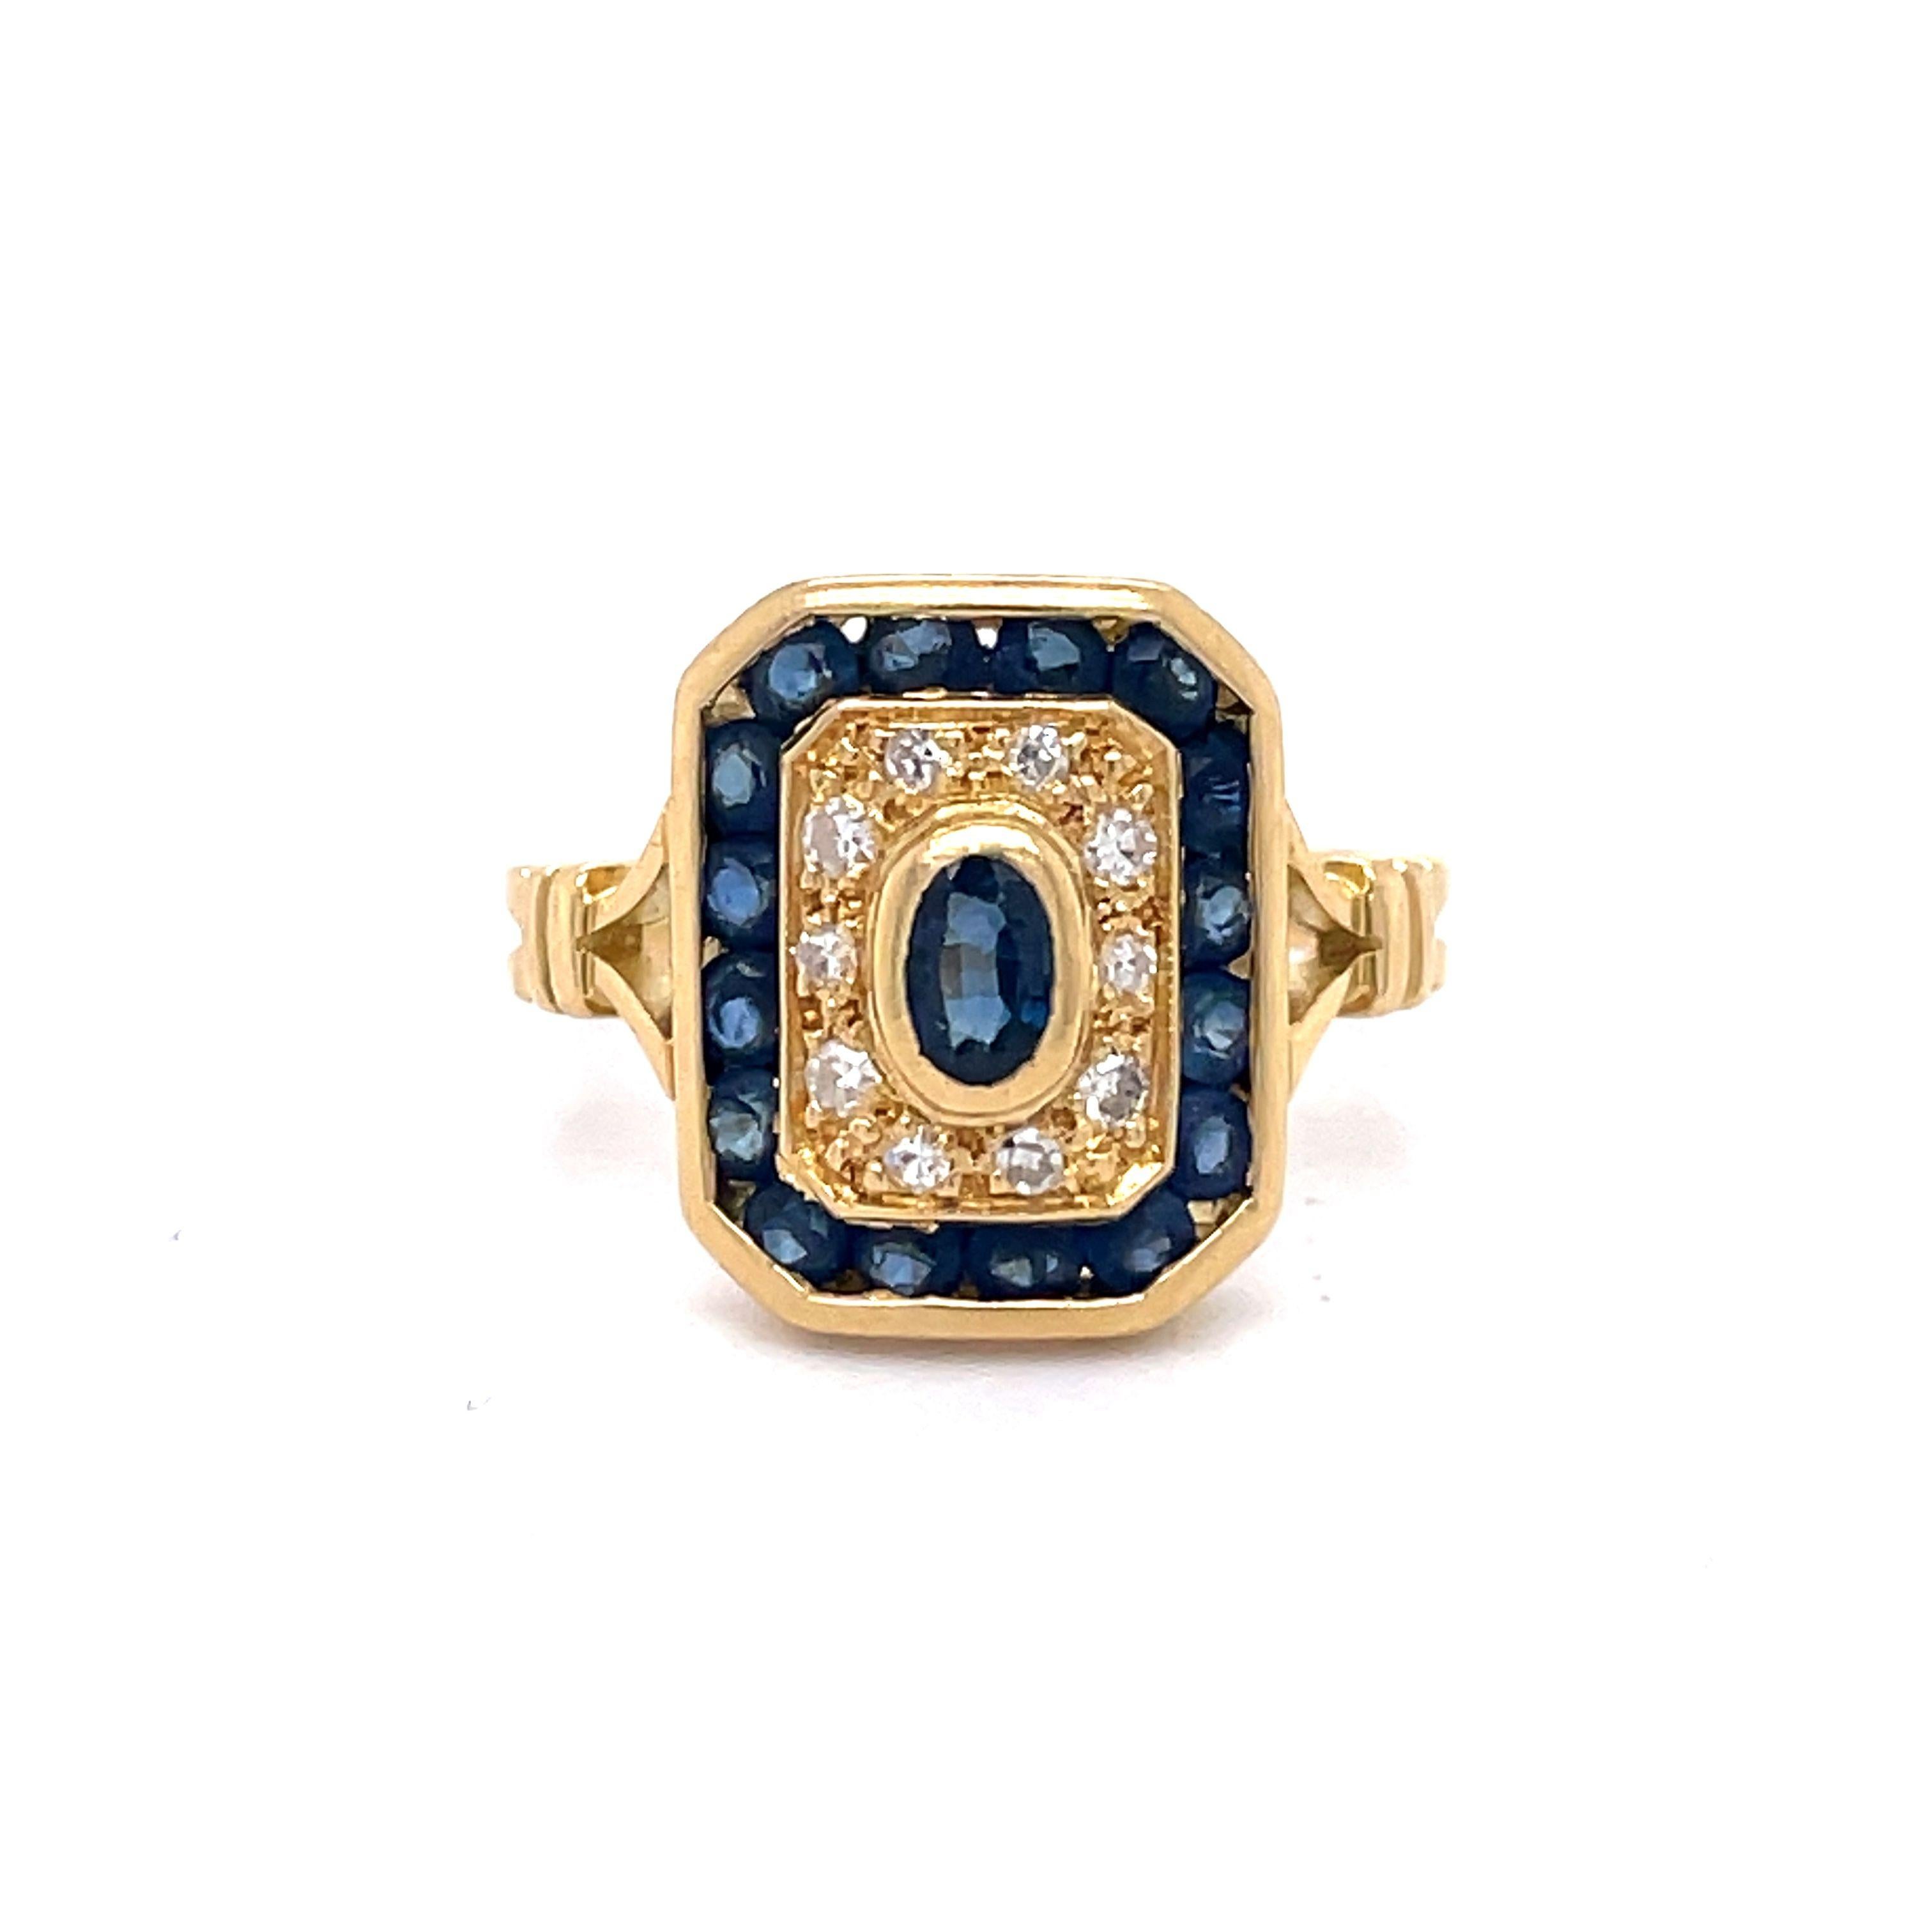 IGL Certified Art Deco Sapphire and Diamond Ring, 14k Yellow Gold, Vintage Ring For Sale 2